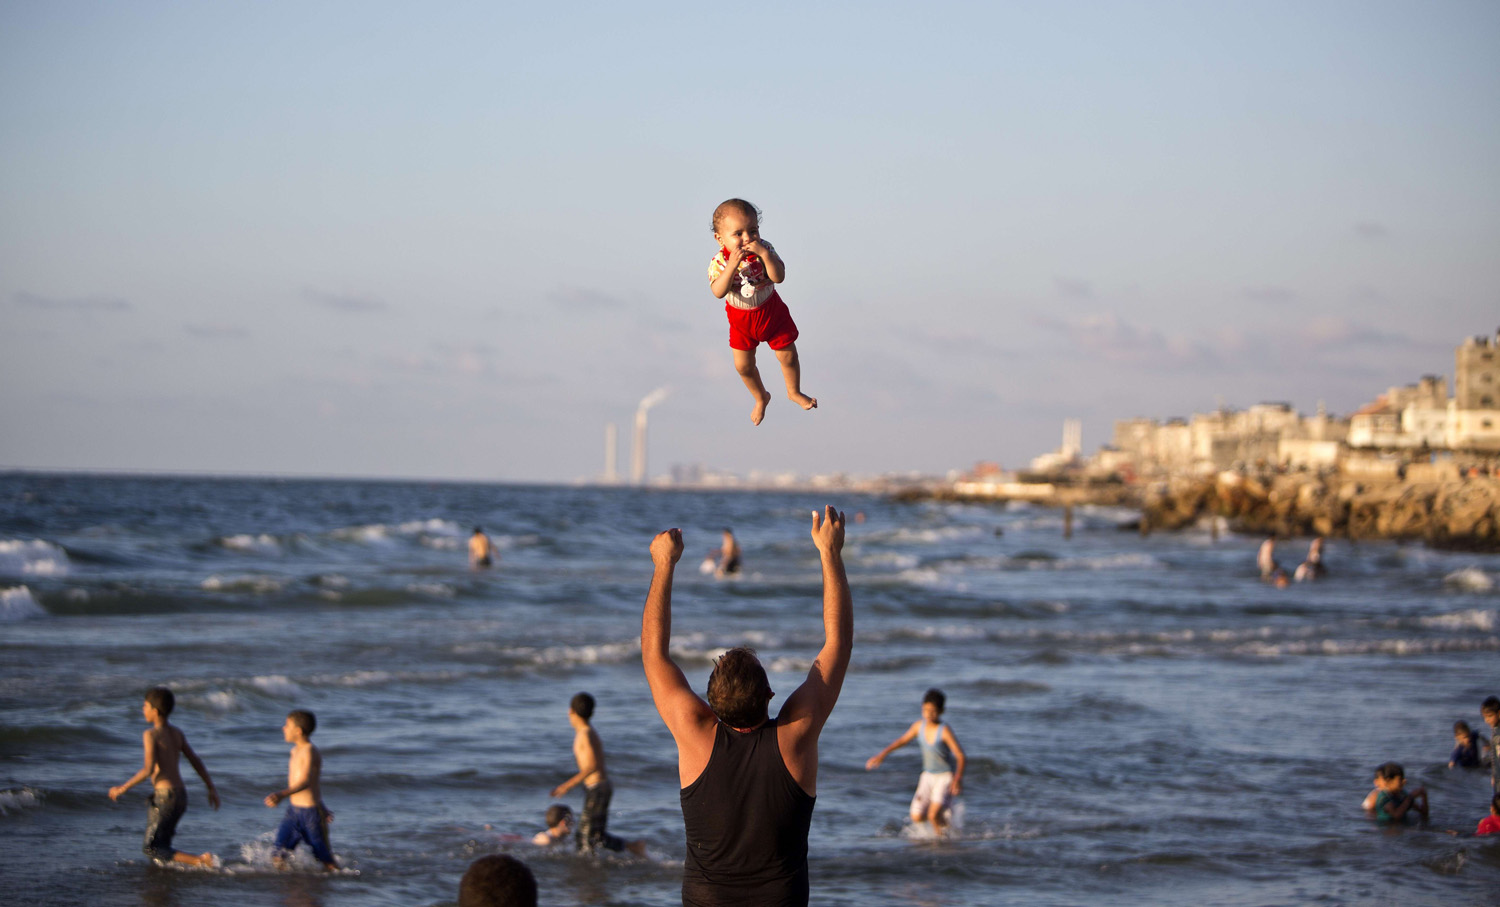 A Palestinian man plays with his baby on a beach on Sept.7, 2014 in Gaza city.